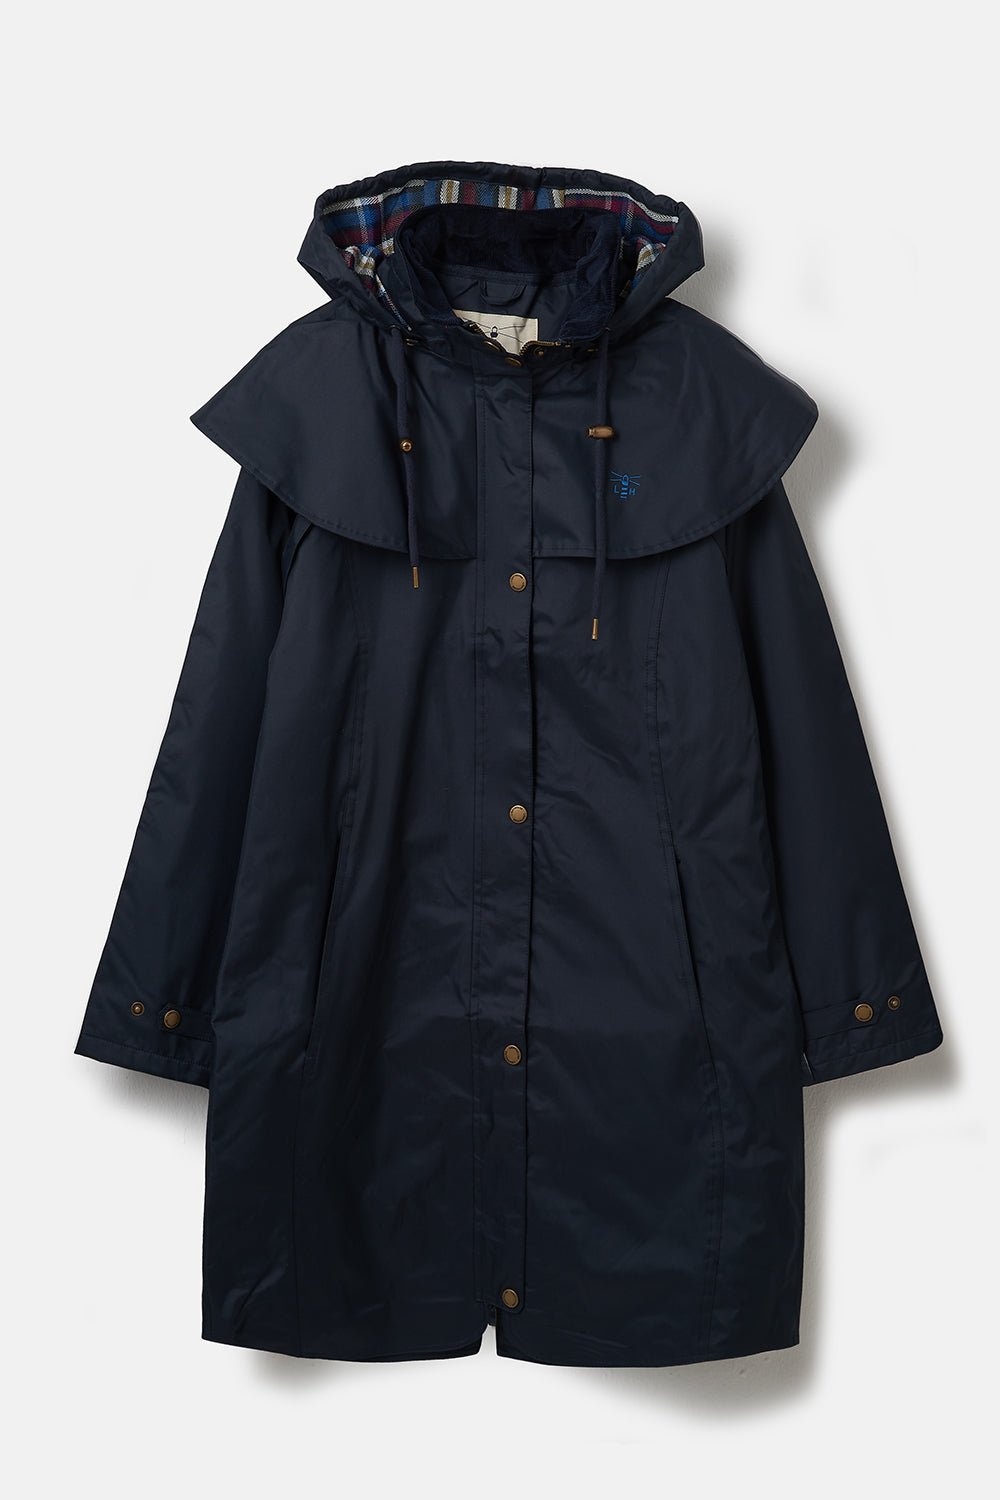 Outrider 3/4 Length Waterproof Raincoat - Nightshade-Lighthouse